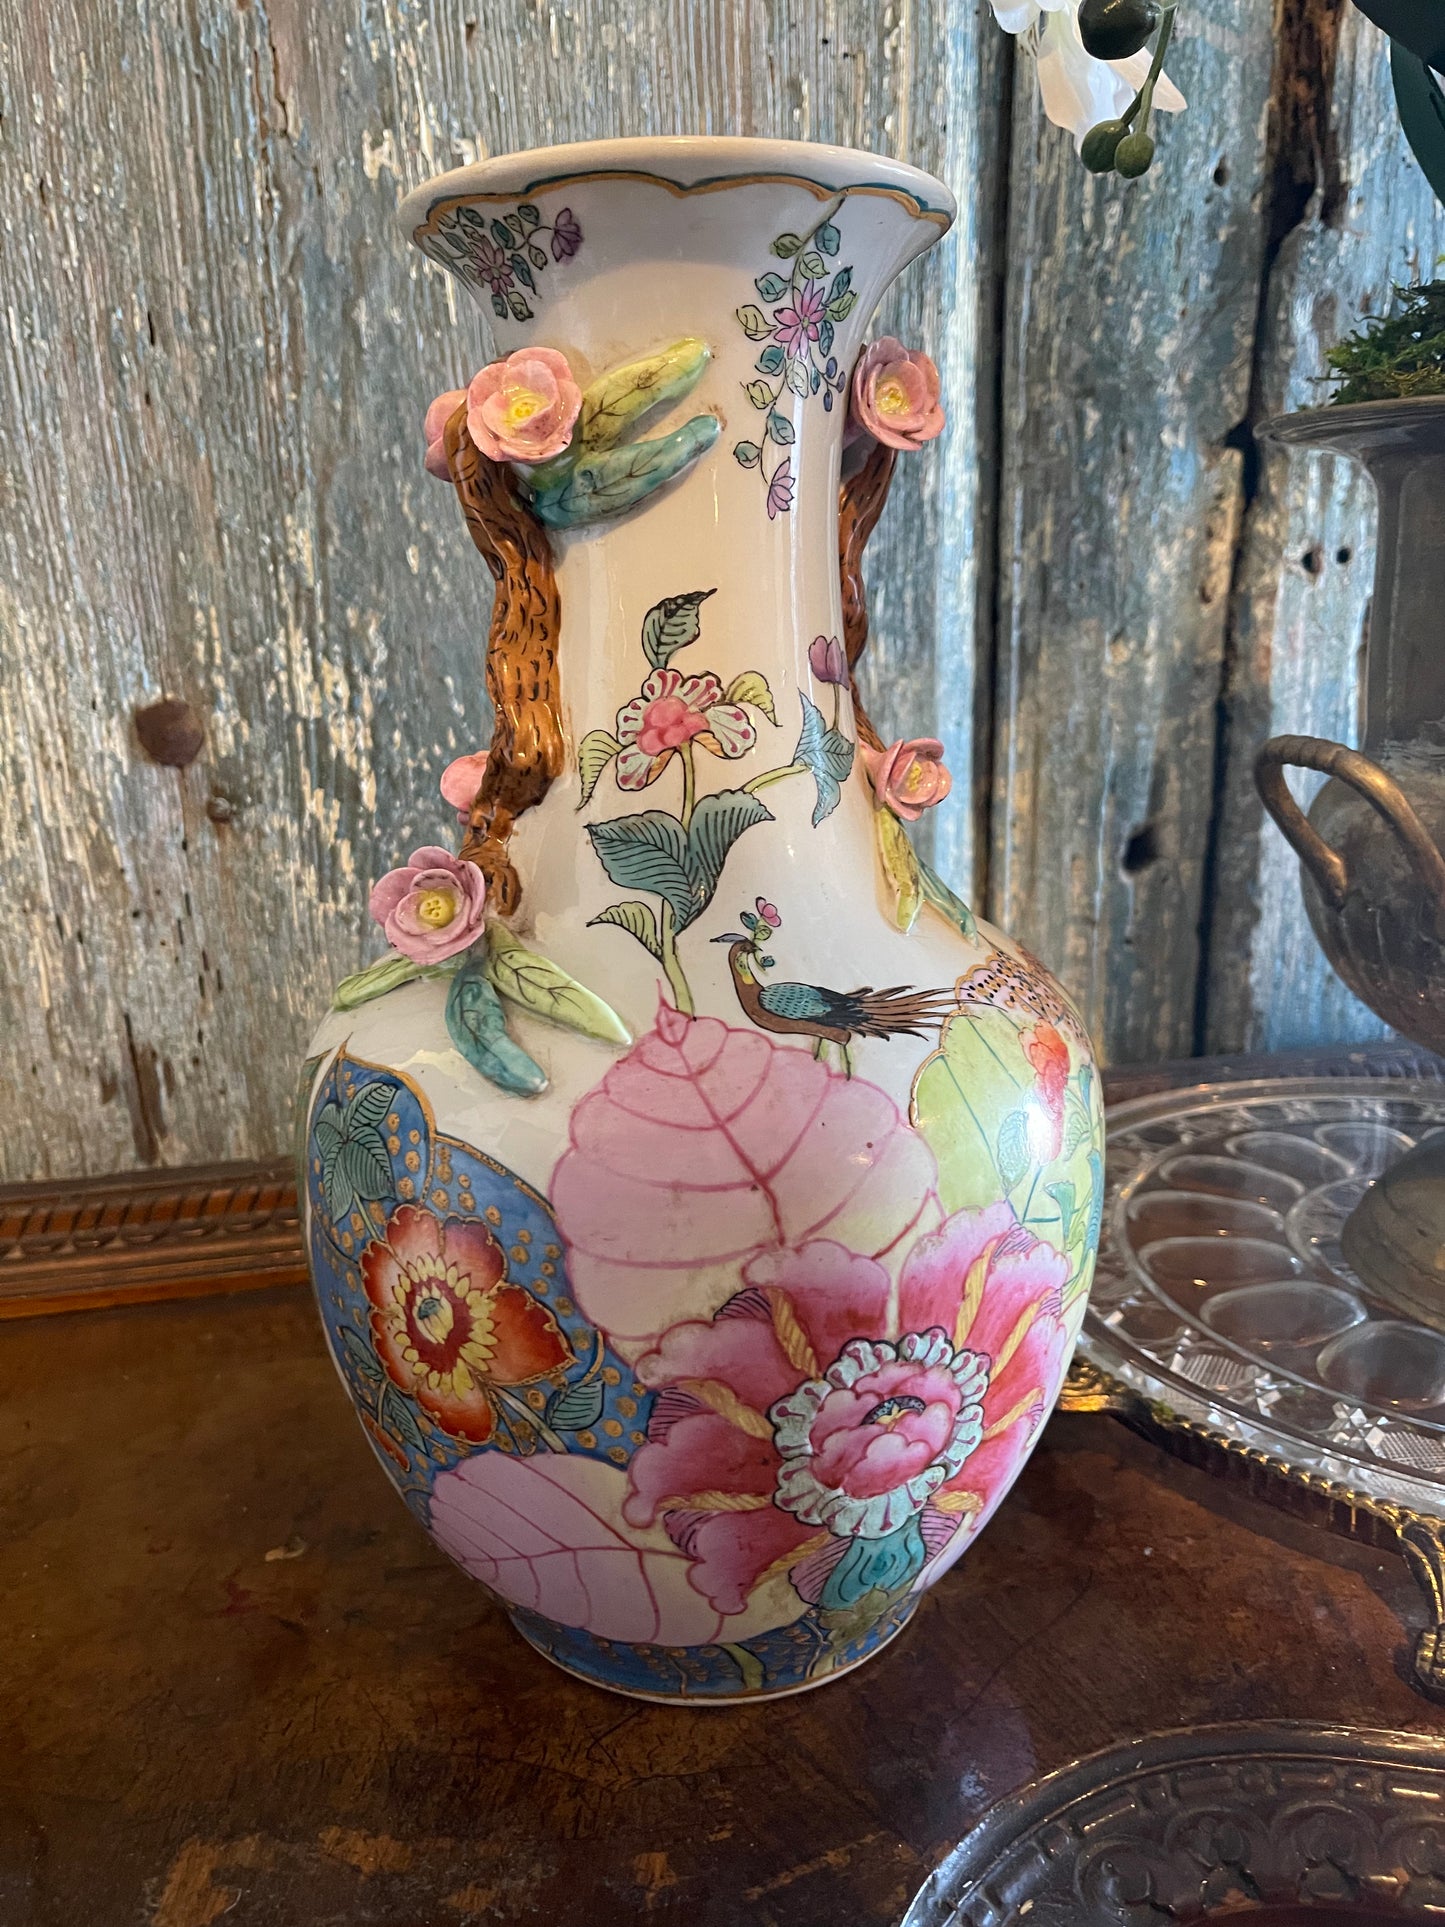 Large 20th Century Hua Ping Tang Zhi Enameled Chinoiserie Tobacco Leaf Vase with Attached Flowers and Raised Branches with Leaves